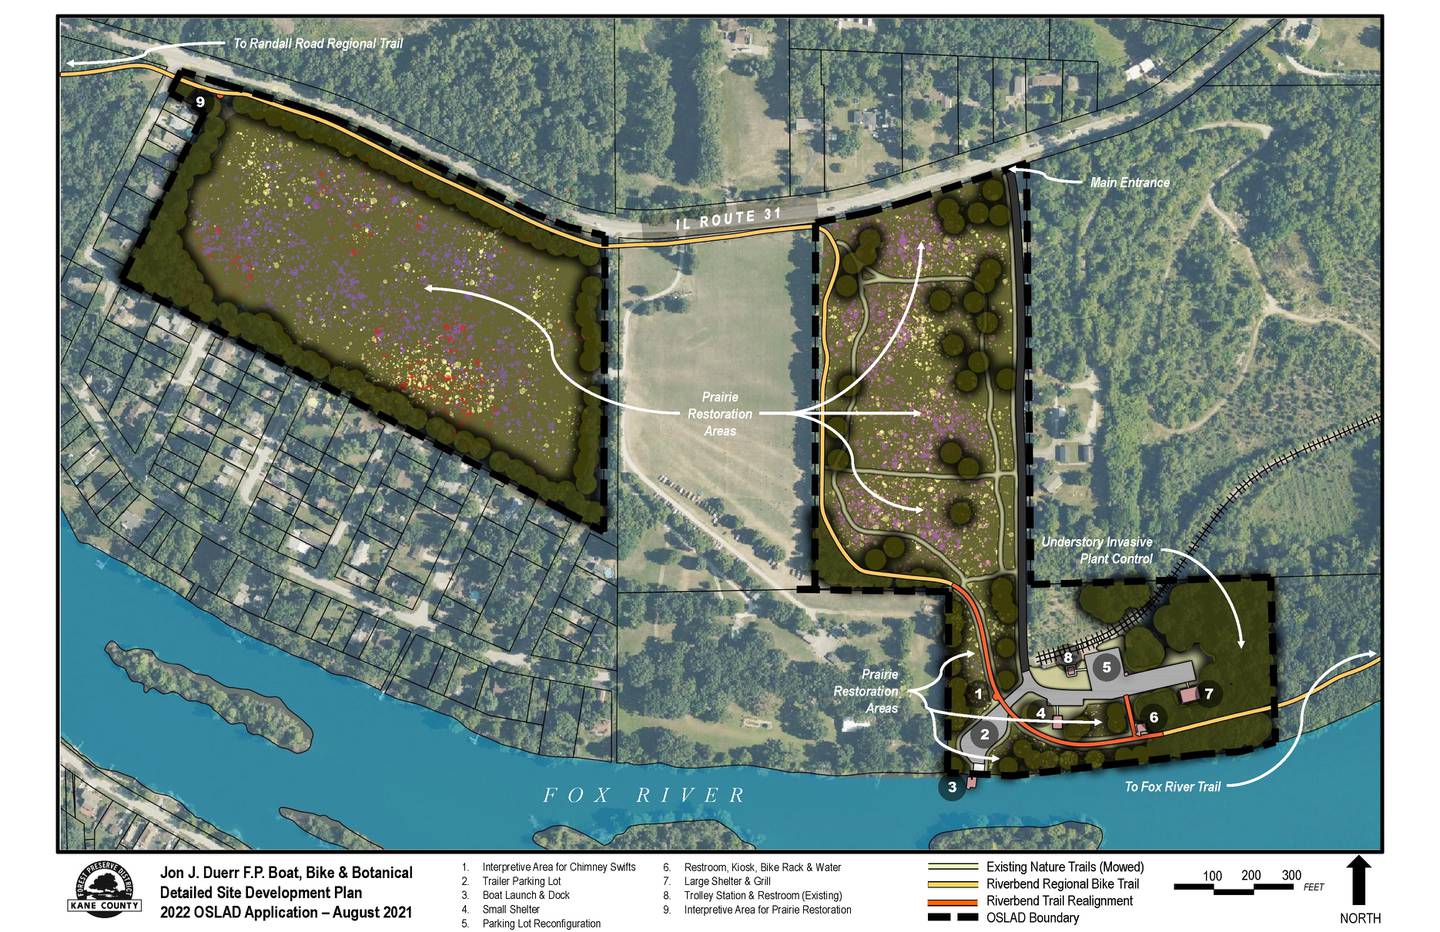 The concept plan of improvements to the Jon J. Duerr Forest Preserve in St. Charles Township, as presented in a state grant application. The Kane County Forest Preserve District was awarded a $400,00 state grant for the project, which will cost an estimated $1.24 million.